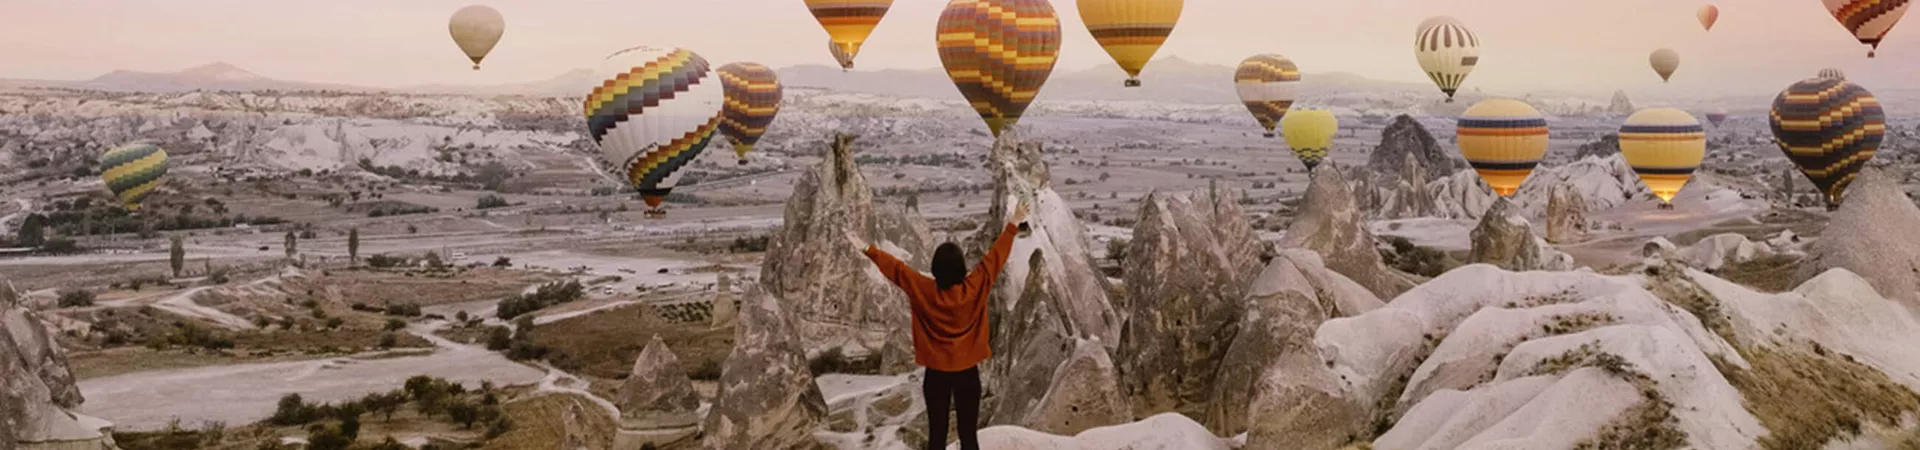 A traveller taking a photo with hot air balloons in Turkey